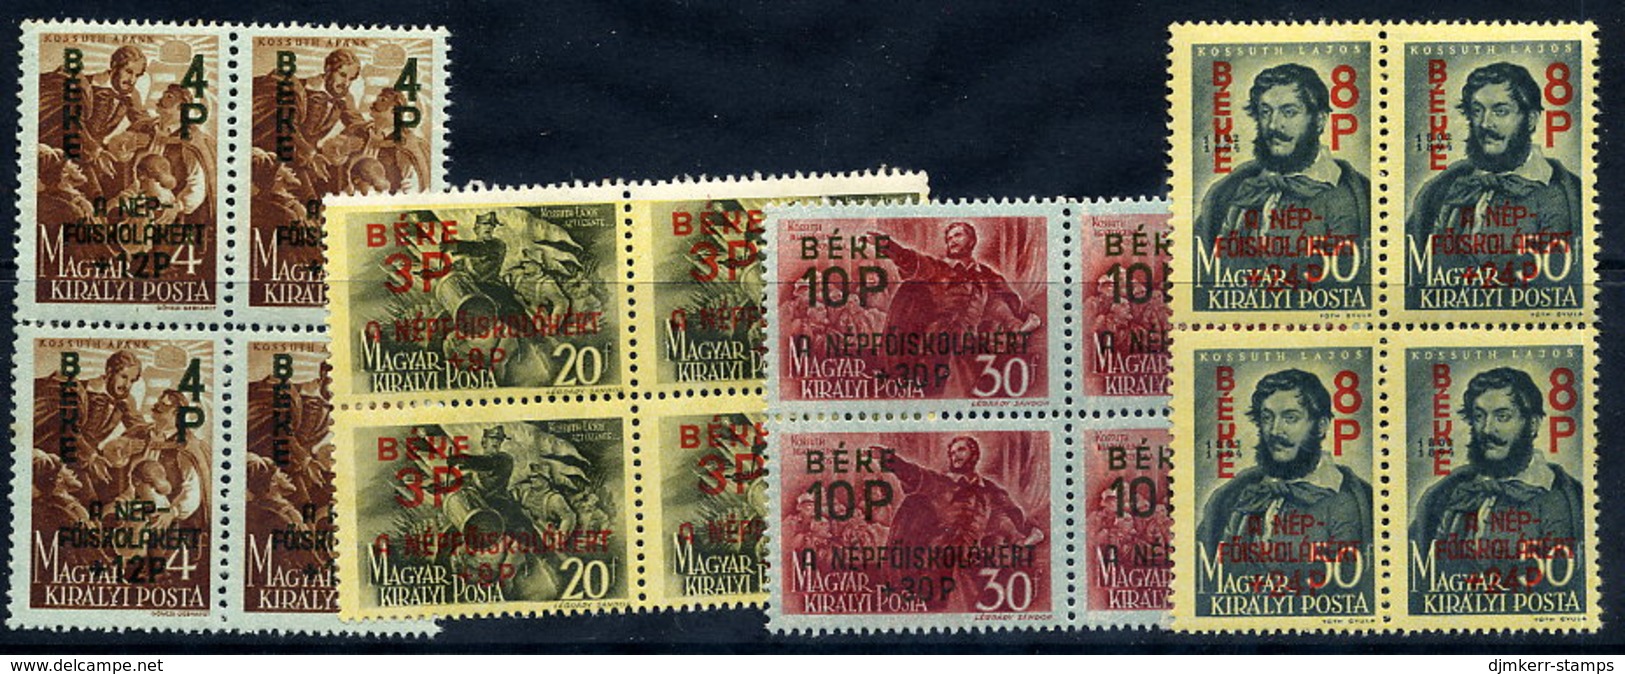 HUNGARY 1945 High School Fund Surcharges In Blocks Of 4 MNH / **.  Michel 774-77 - Unused Stamps